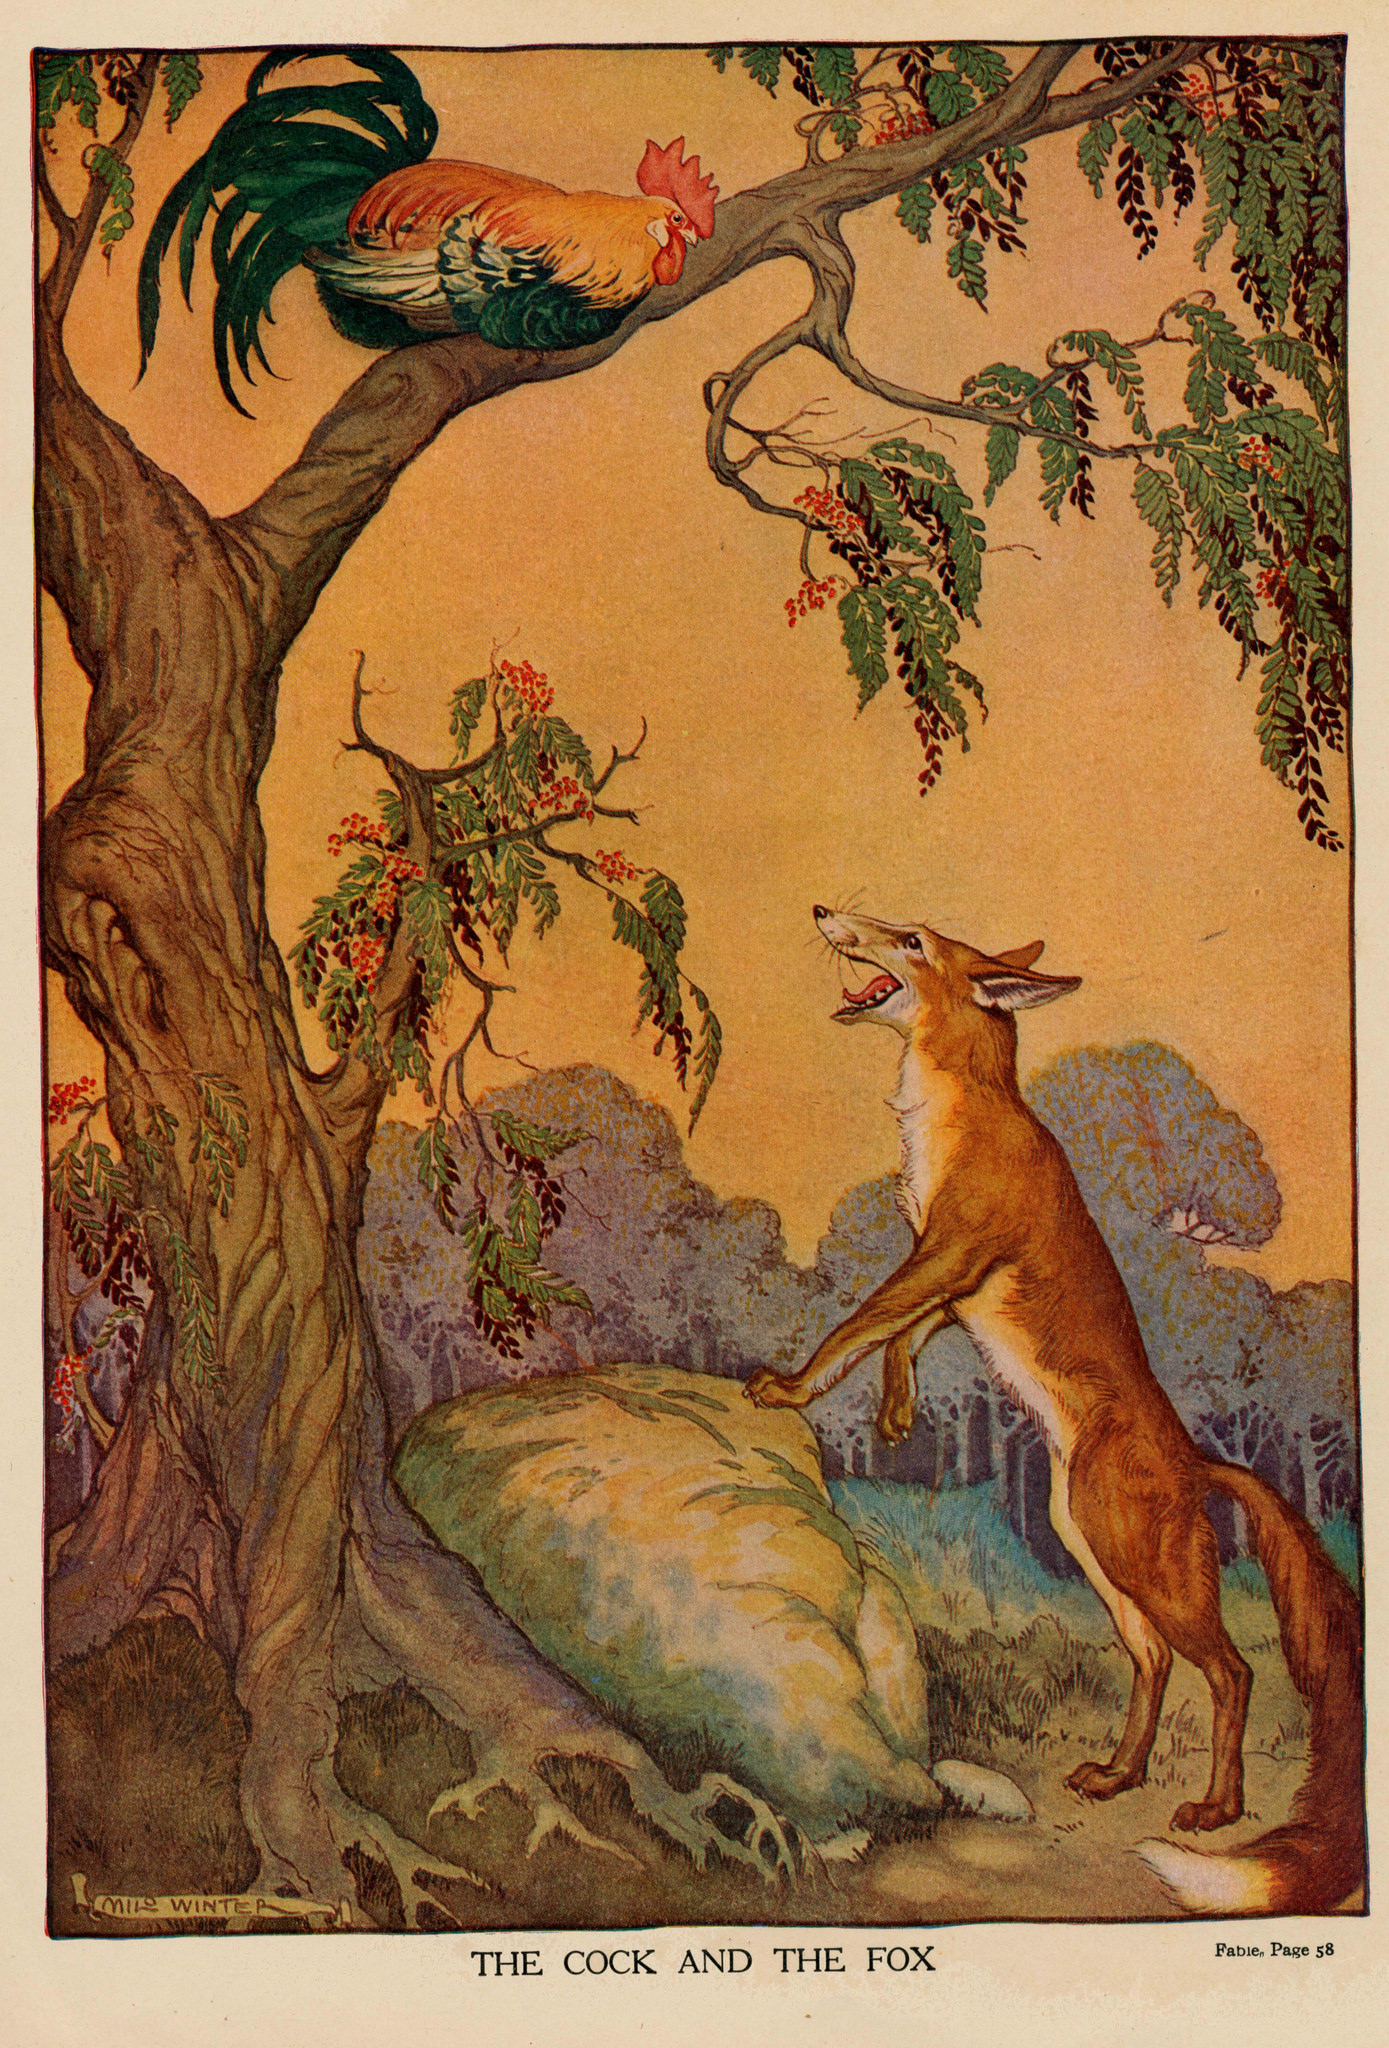 The Cock And The Fox By Milo Winter, 1919.